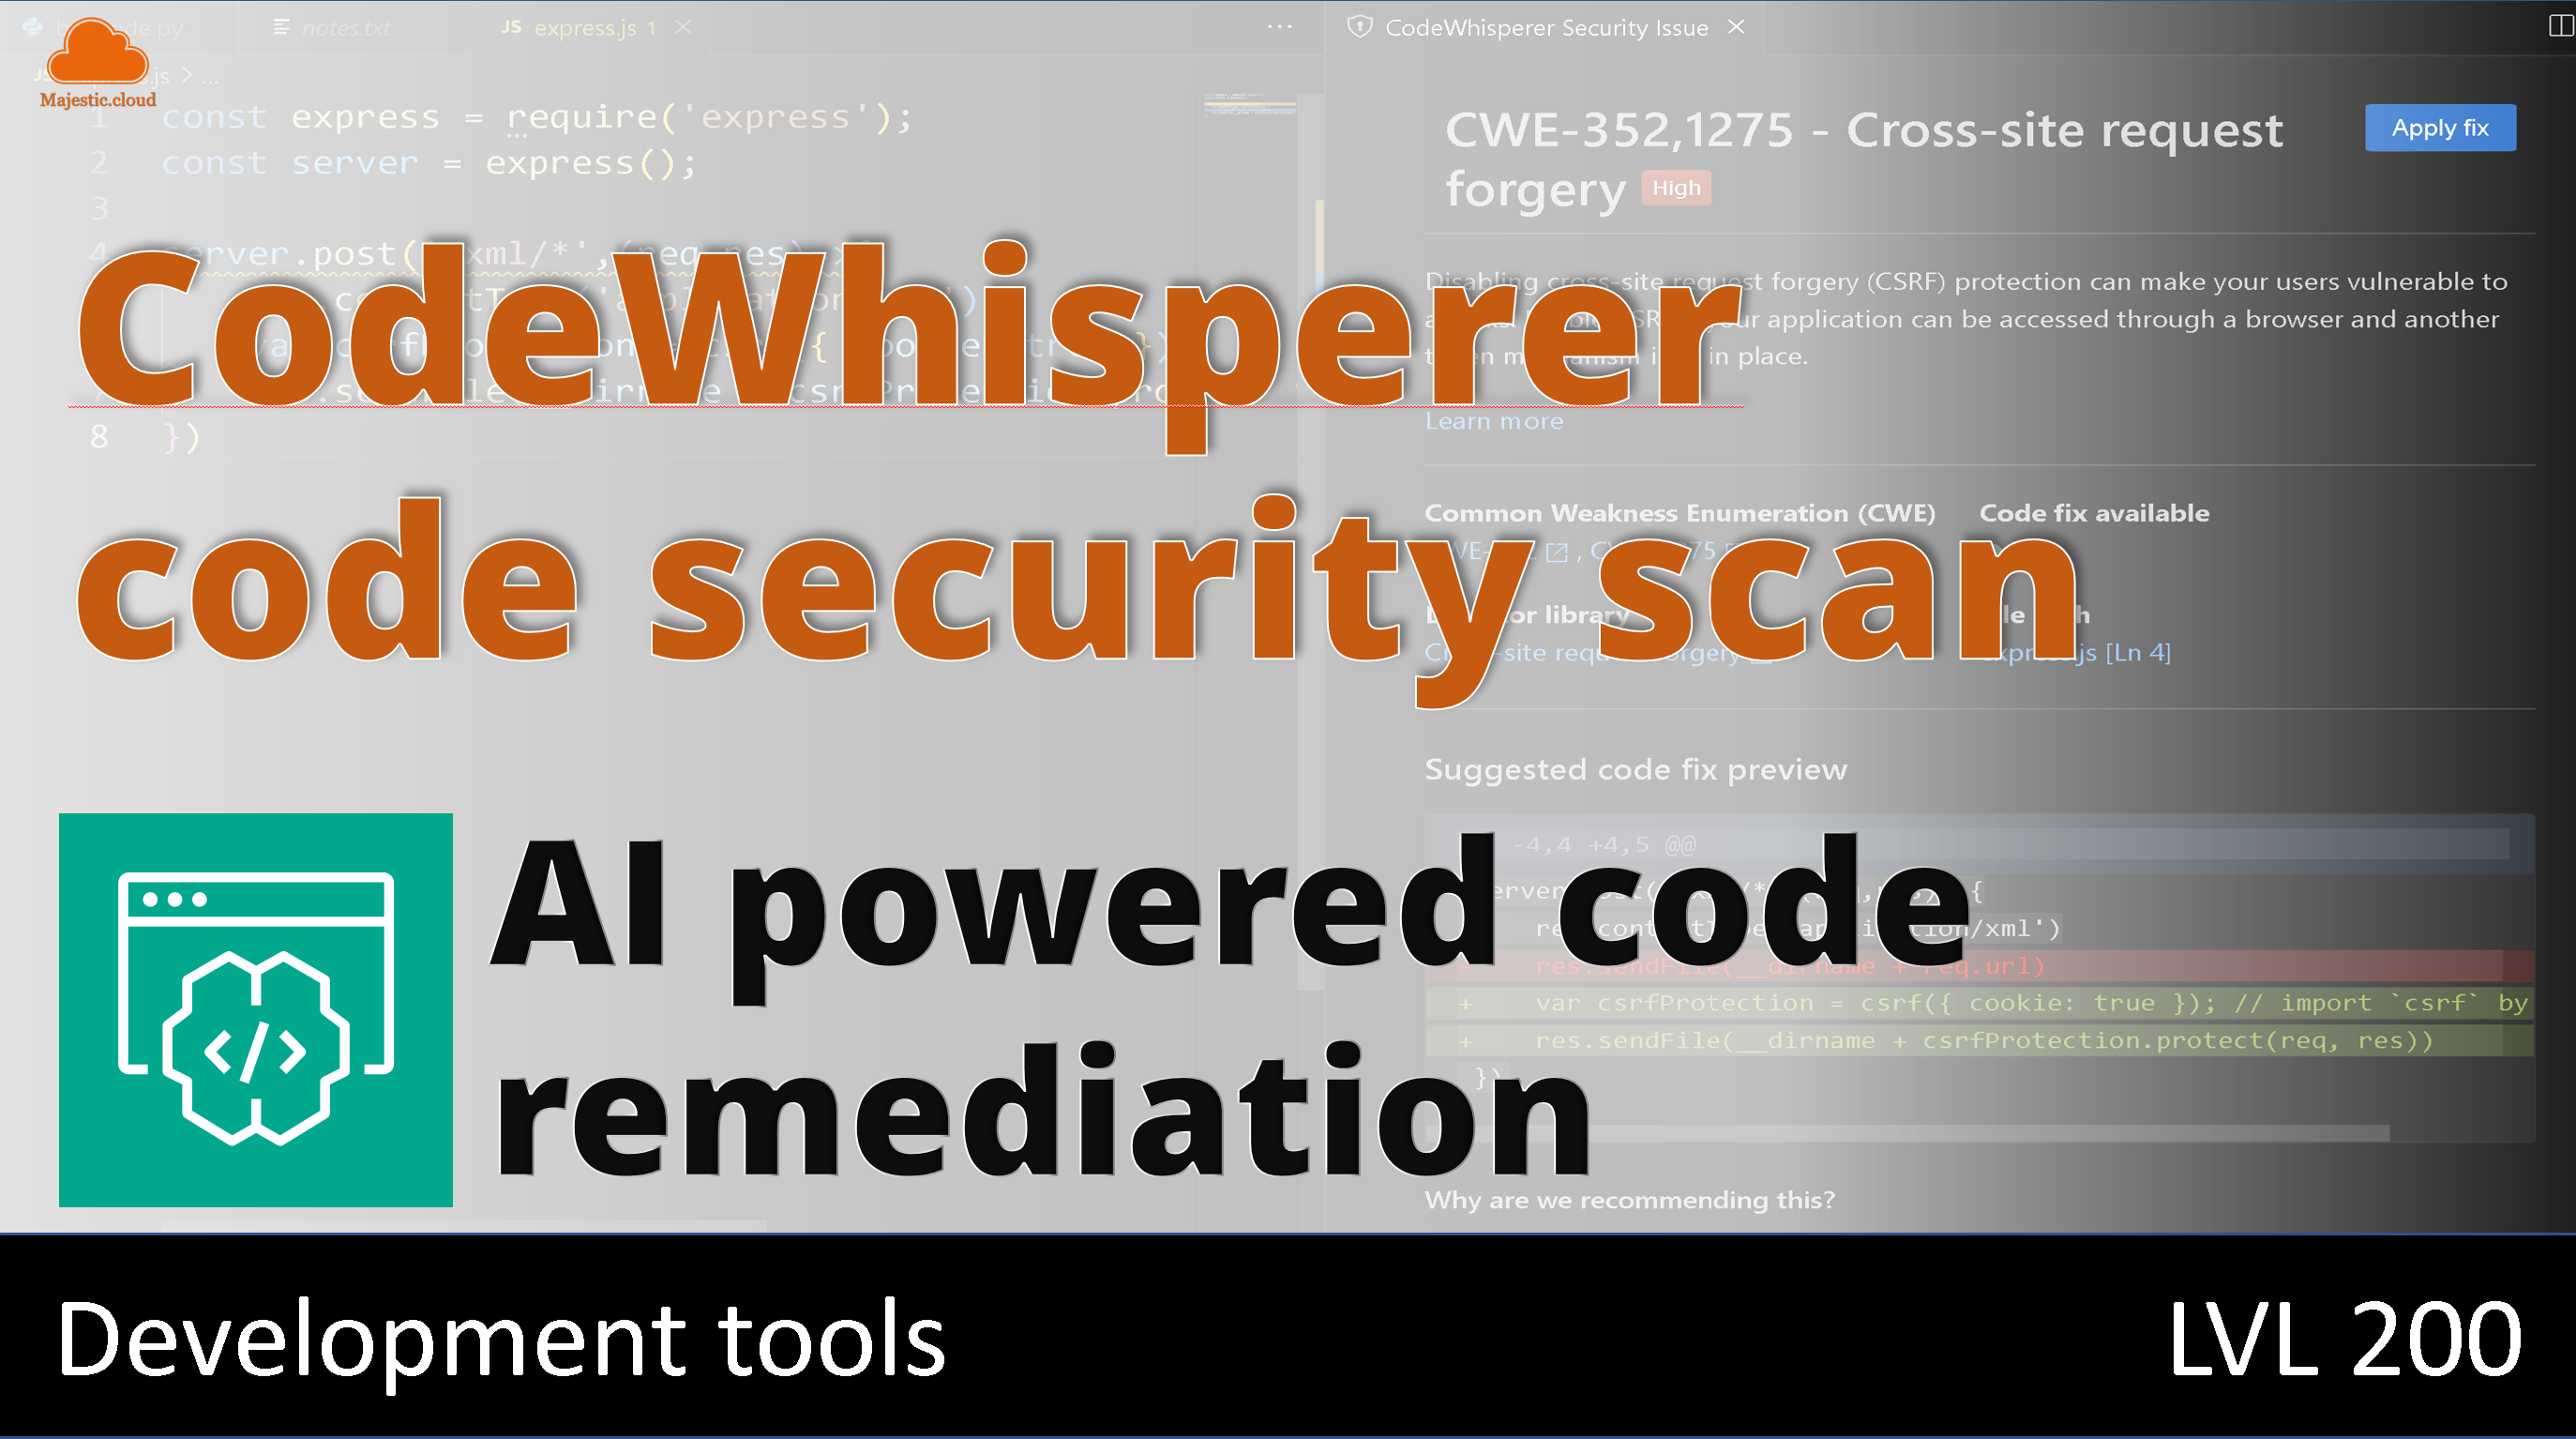 New feature in CodeWhisperer: AI based code remediation for security vulnerabilities